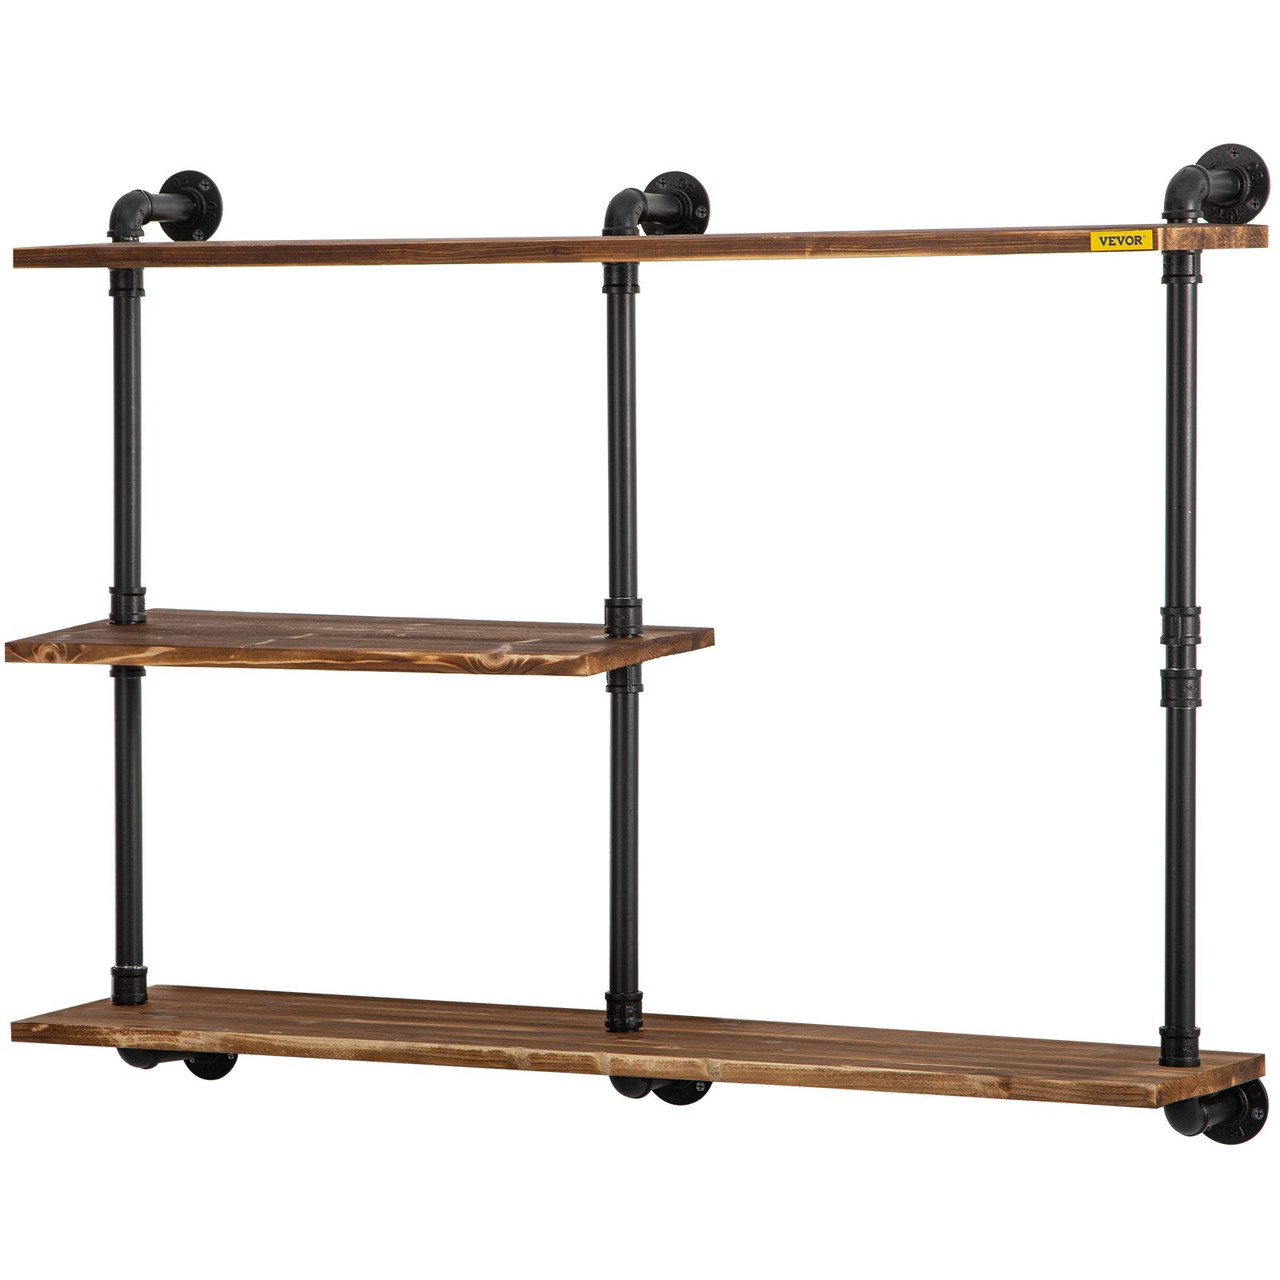 VEVOR Industrial Pipe Shelving, Pipe Shelves with 3-Tier Wood Planks, Rustic Floating Shelves Wall Mounted, Wall Shelf DIY Bookshelf for Bar Kitchen Bathroom Farmhouse Living Room, 43x38x11 inch